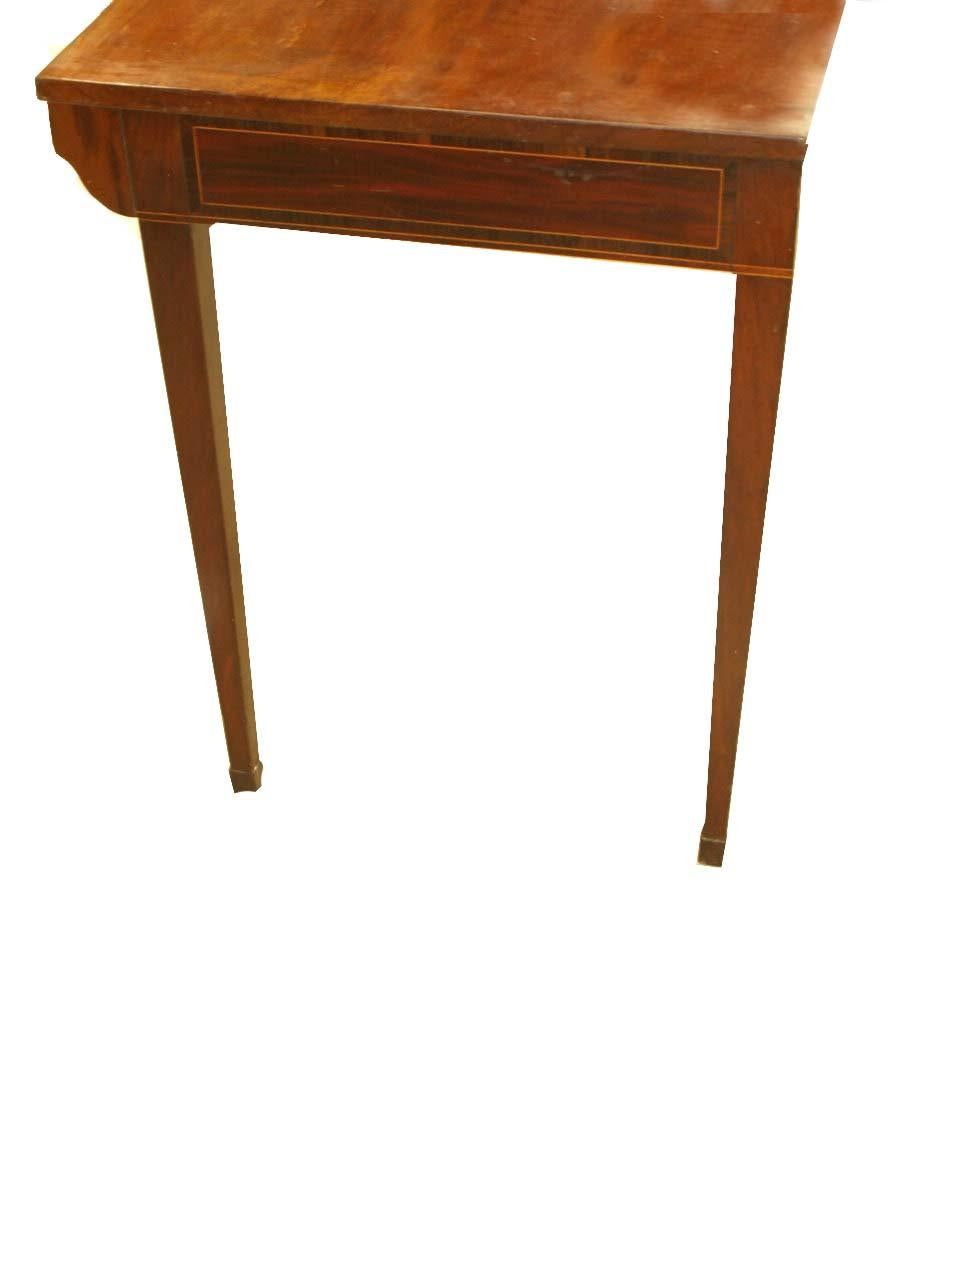 Hepplewhite mahogany console table with beautiful figured top, the front and sides with flame mahogany veneer surrounded by a band of inlay, the front with central cartouche of satinwood; tapered legs terminating with delicate marlboro feet.